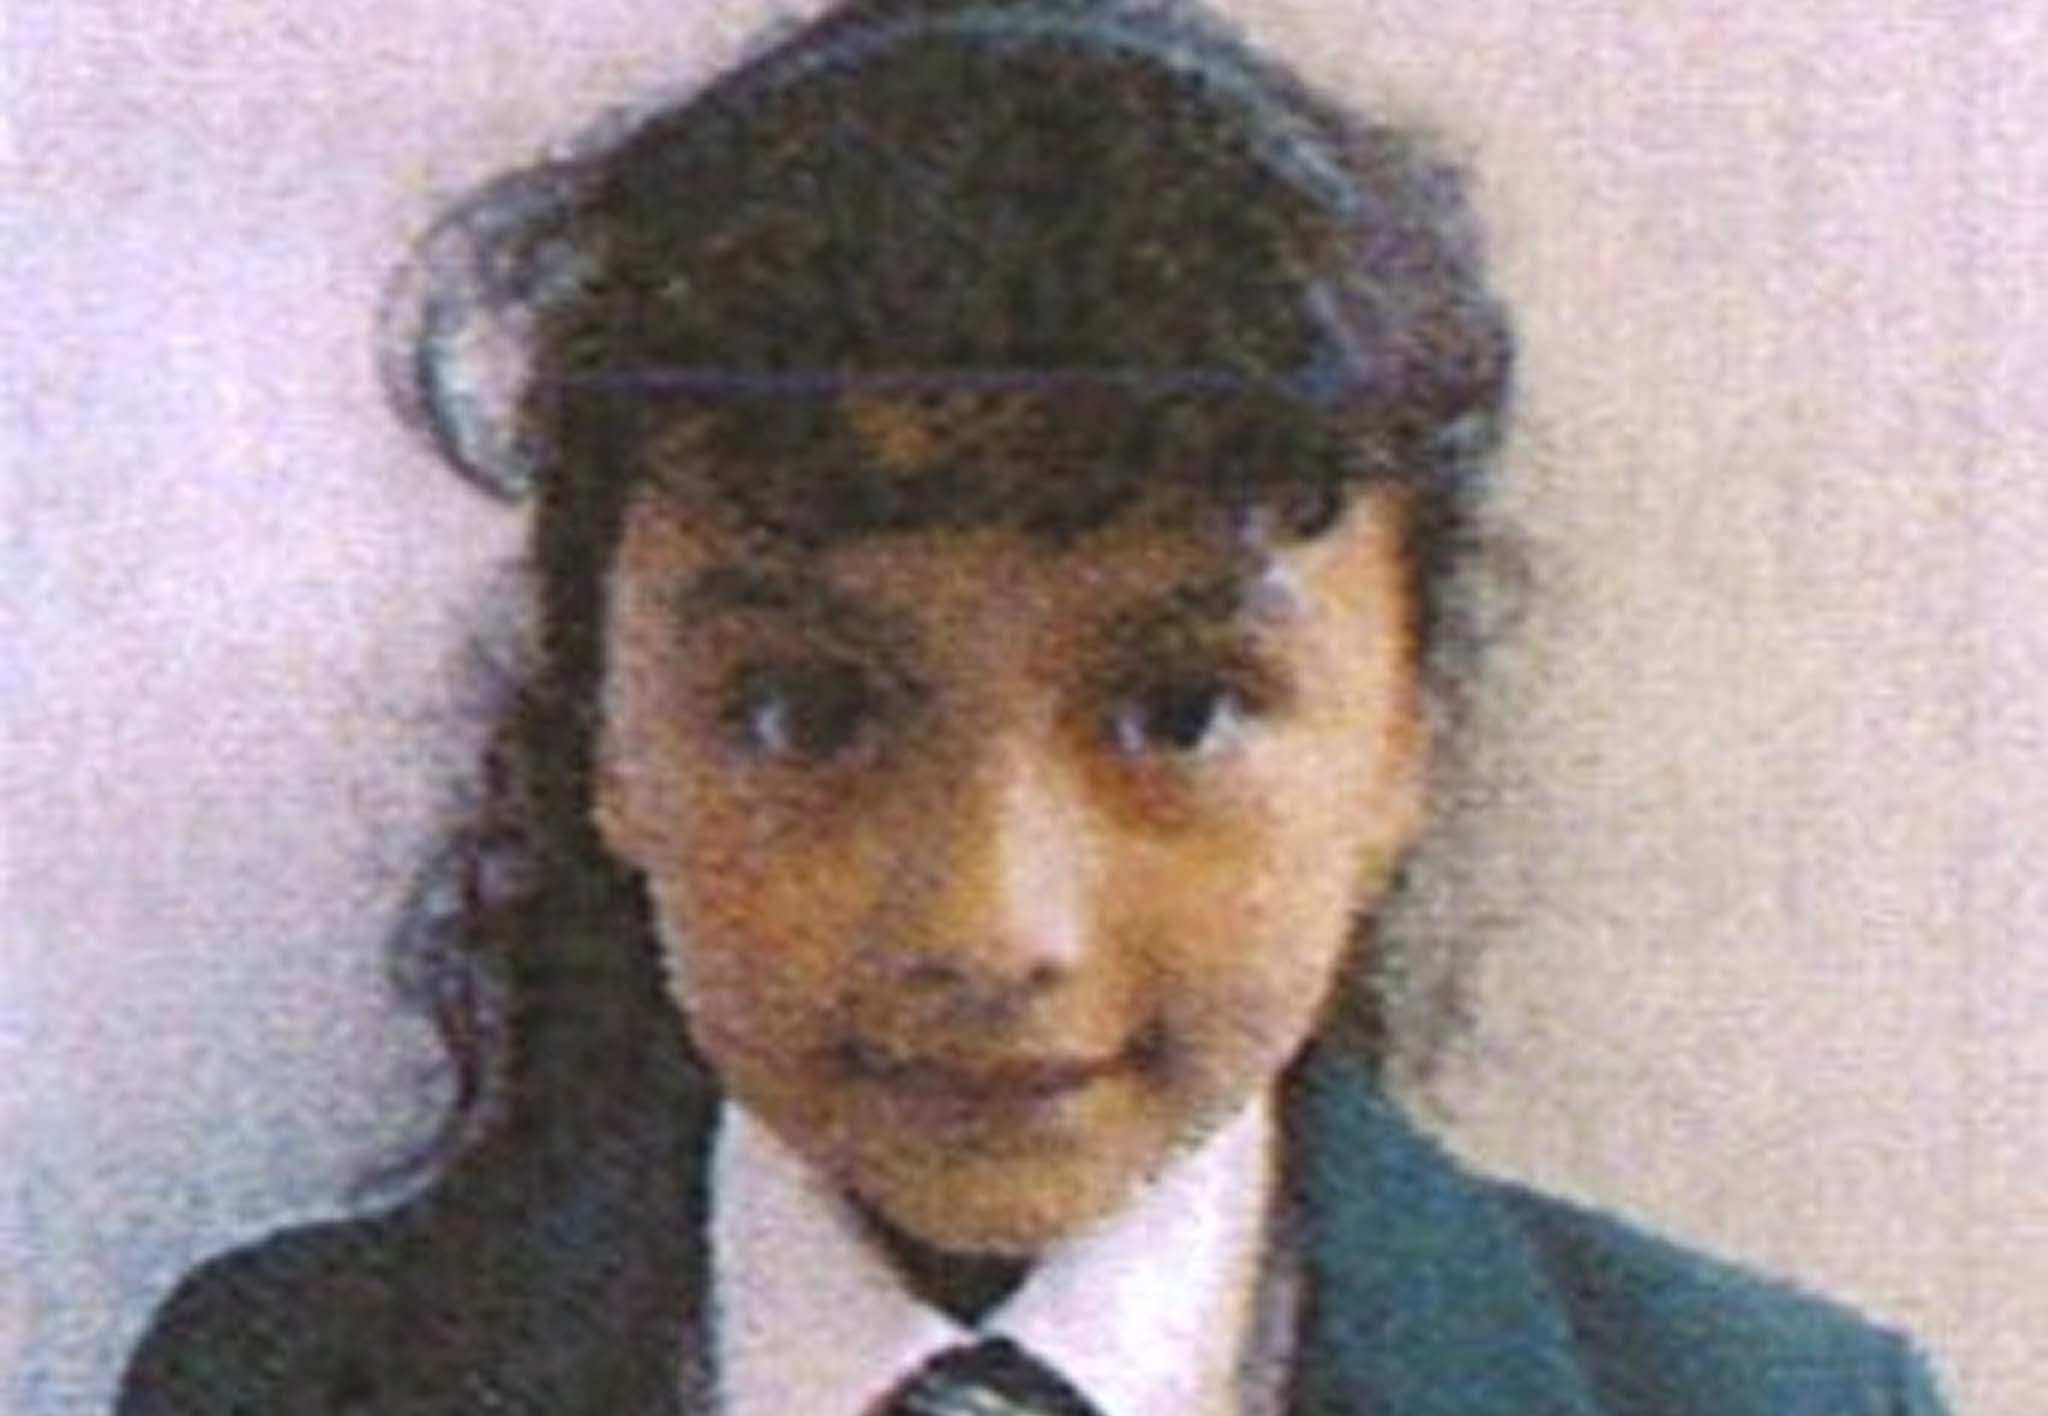 Katrina Carvajal-Zurita, 8, has been missing for two days